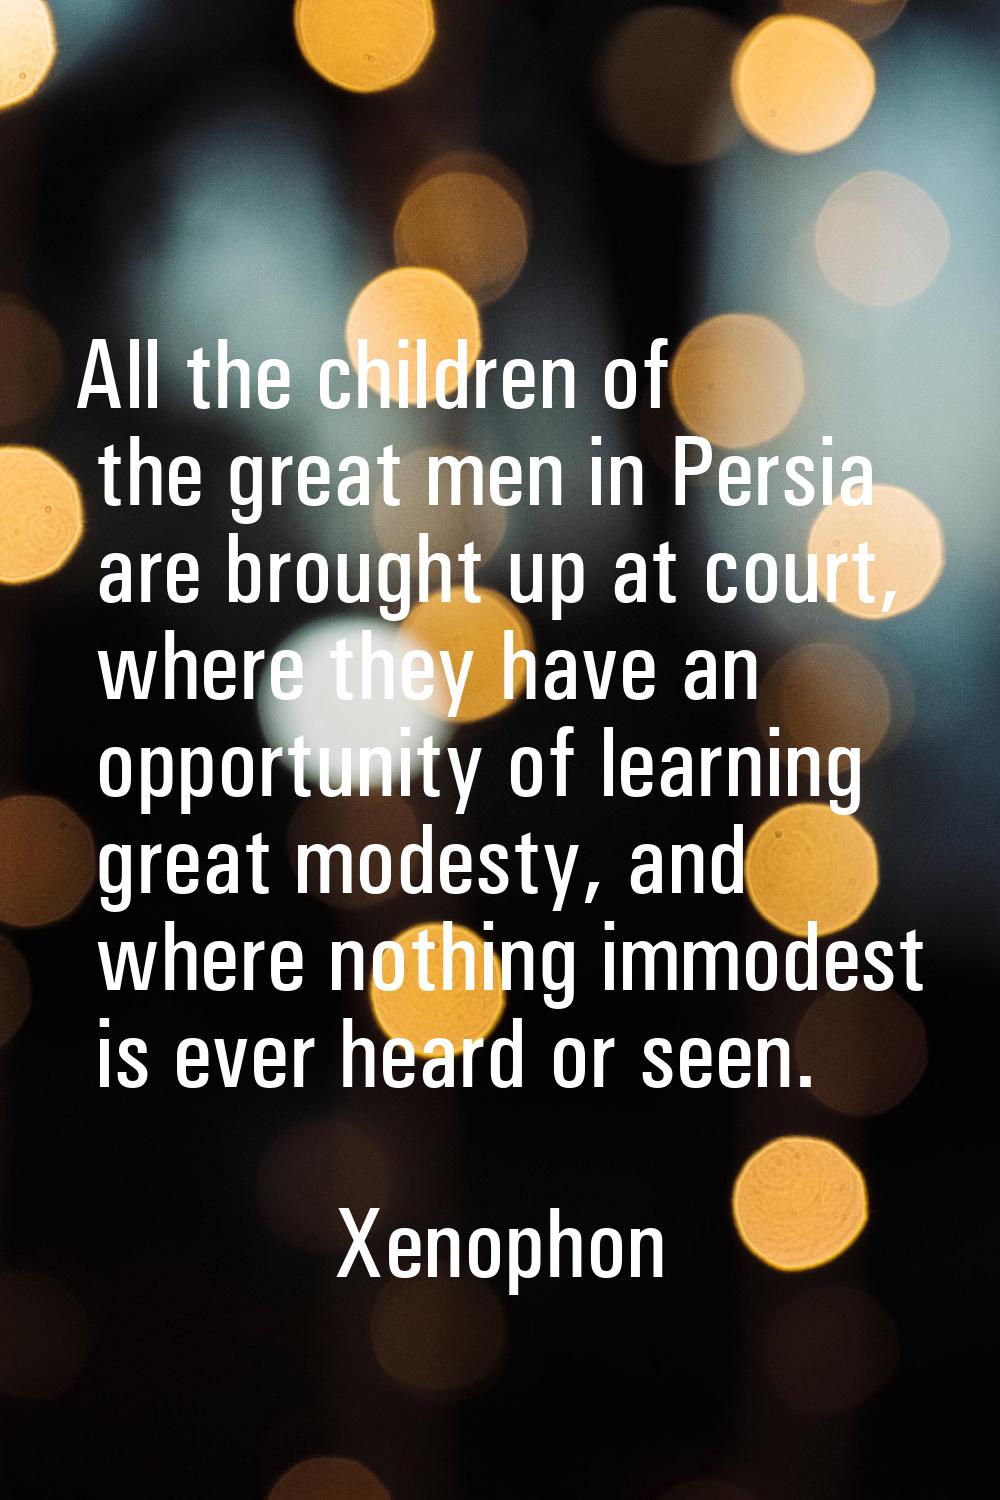 All the children of the great men in Persia are brought up at court, where they have an opportunity